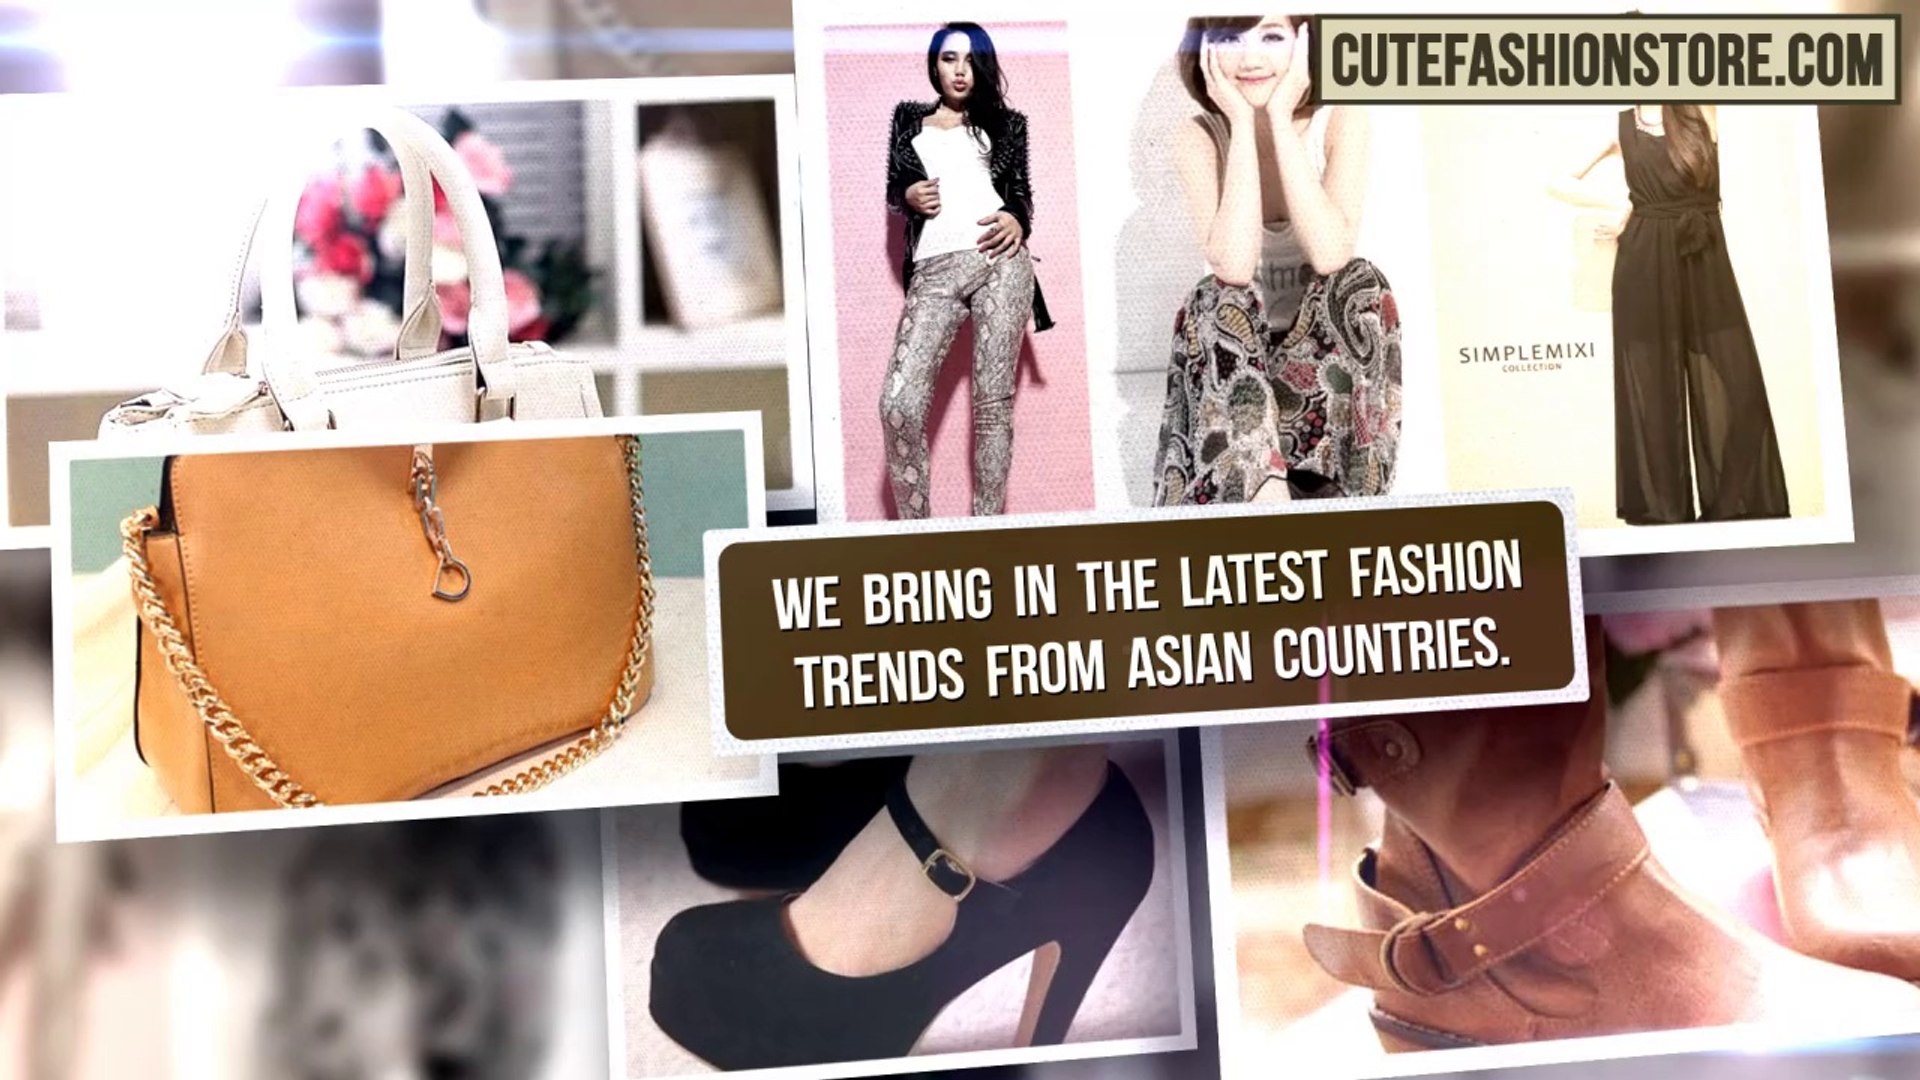 Cute Fashion | Ultimate Place for Asian Clothing